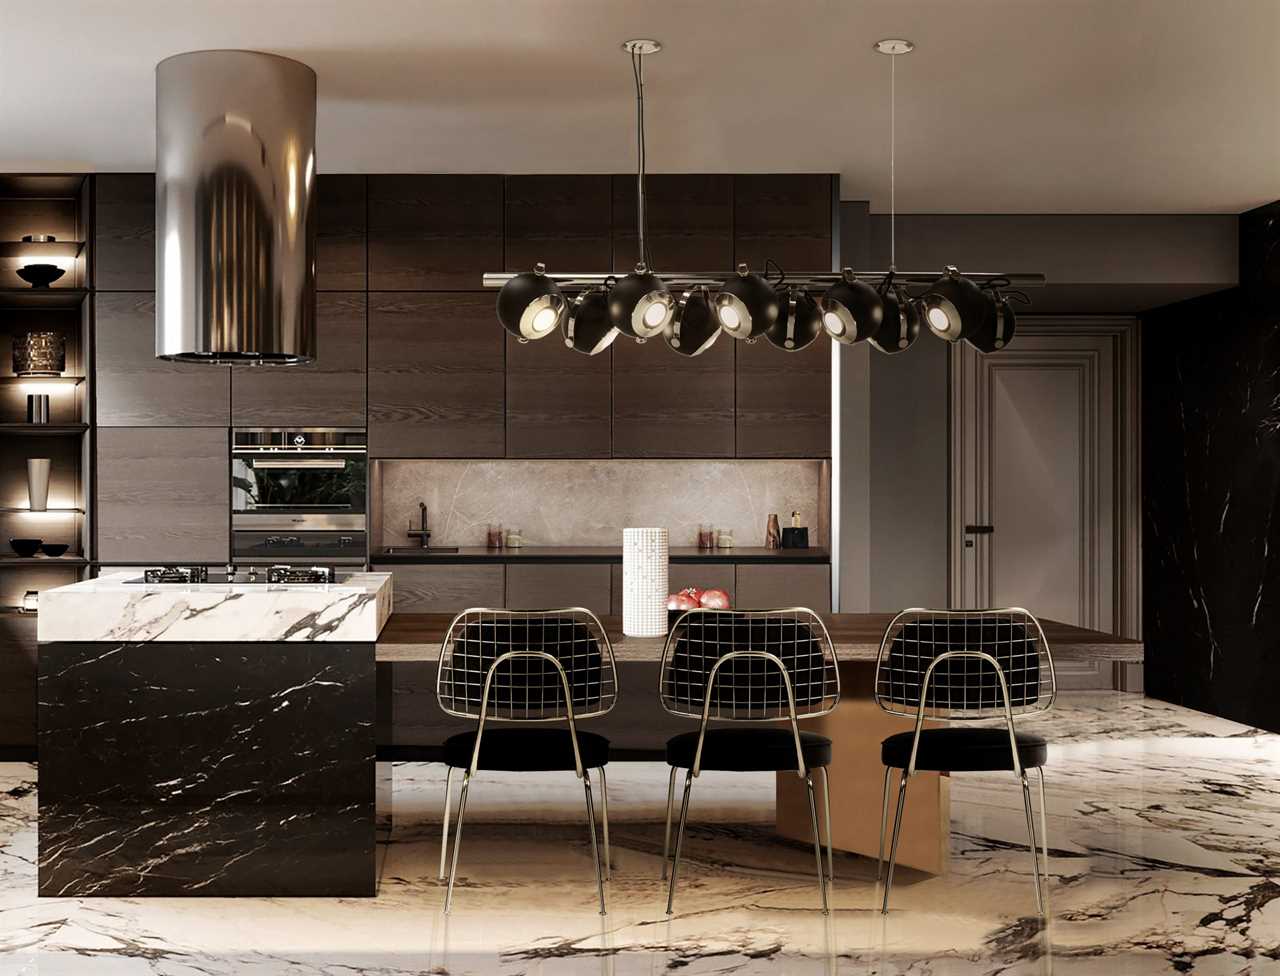 Design a Contemporary Asian Fusion Kitchen With Zen Elements and Asian-Inspired Decor